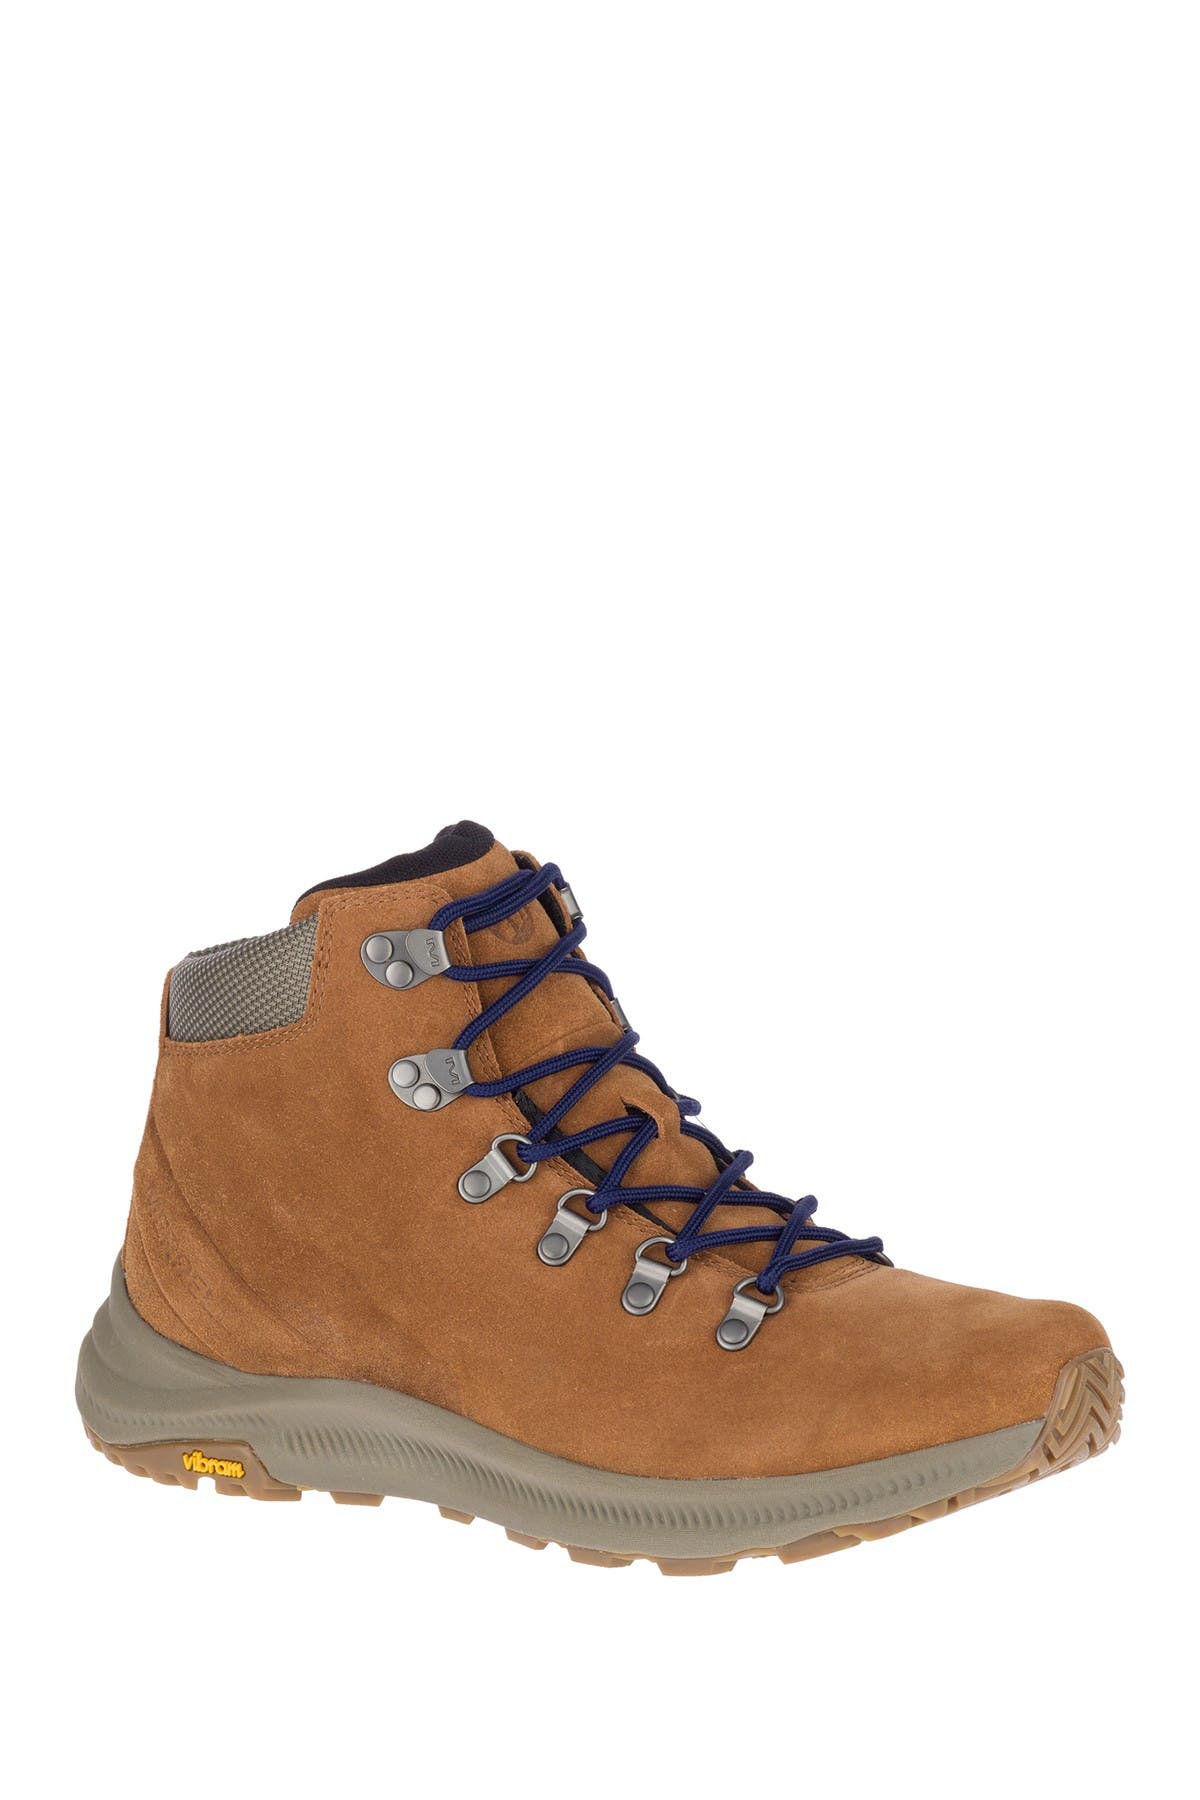 nordstrom rack women's hiking shoes